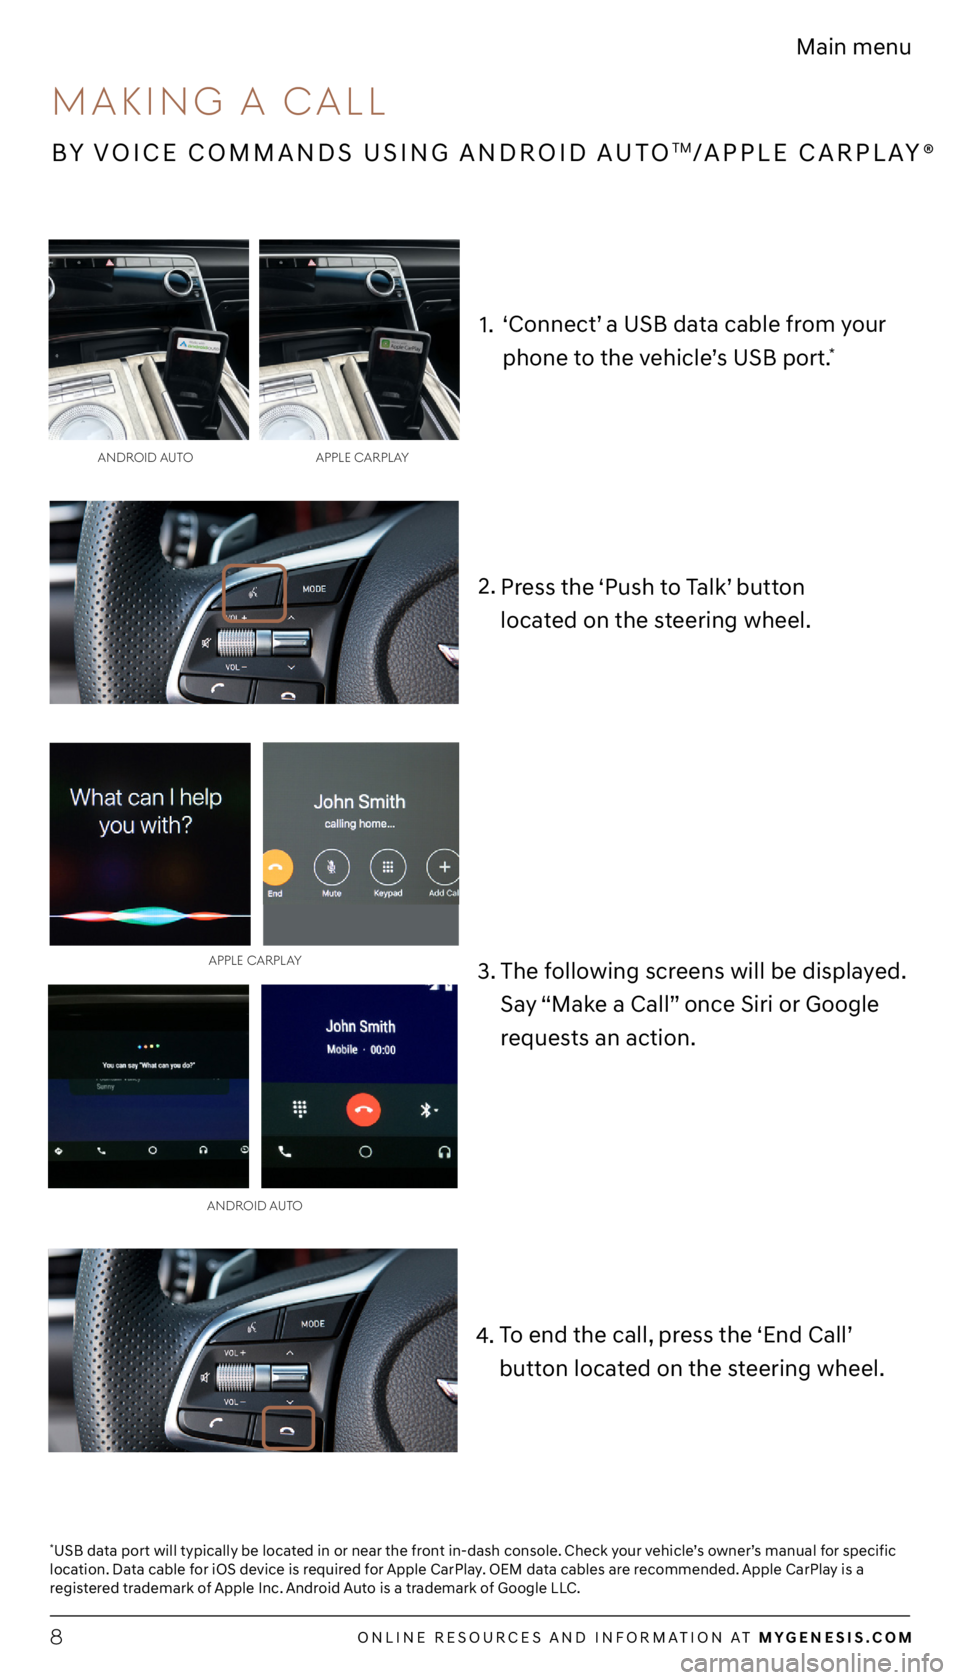 GENESIS G70 2021  Getting Started Guide ONLINE RESOURCES AND INFORMATION AT MYGENESIS.COM8
Main menu
2. Press the ‘Push to Talk’ button   
located on the steering wheel.
ANdROId A UTO
APPLE C
ARPLAy
3.
The following screens will be disp